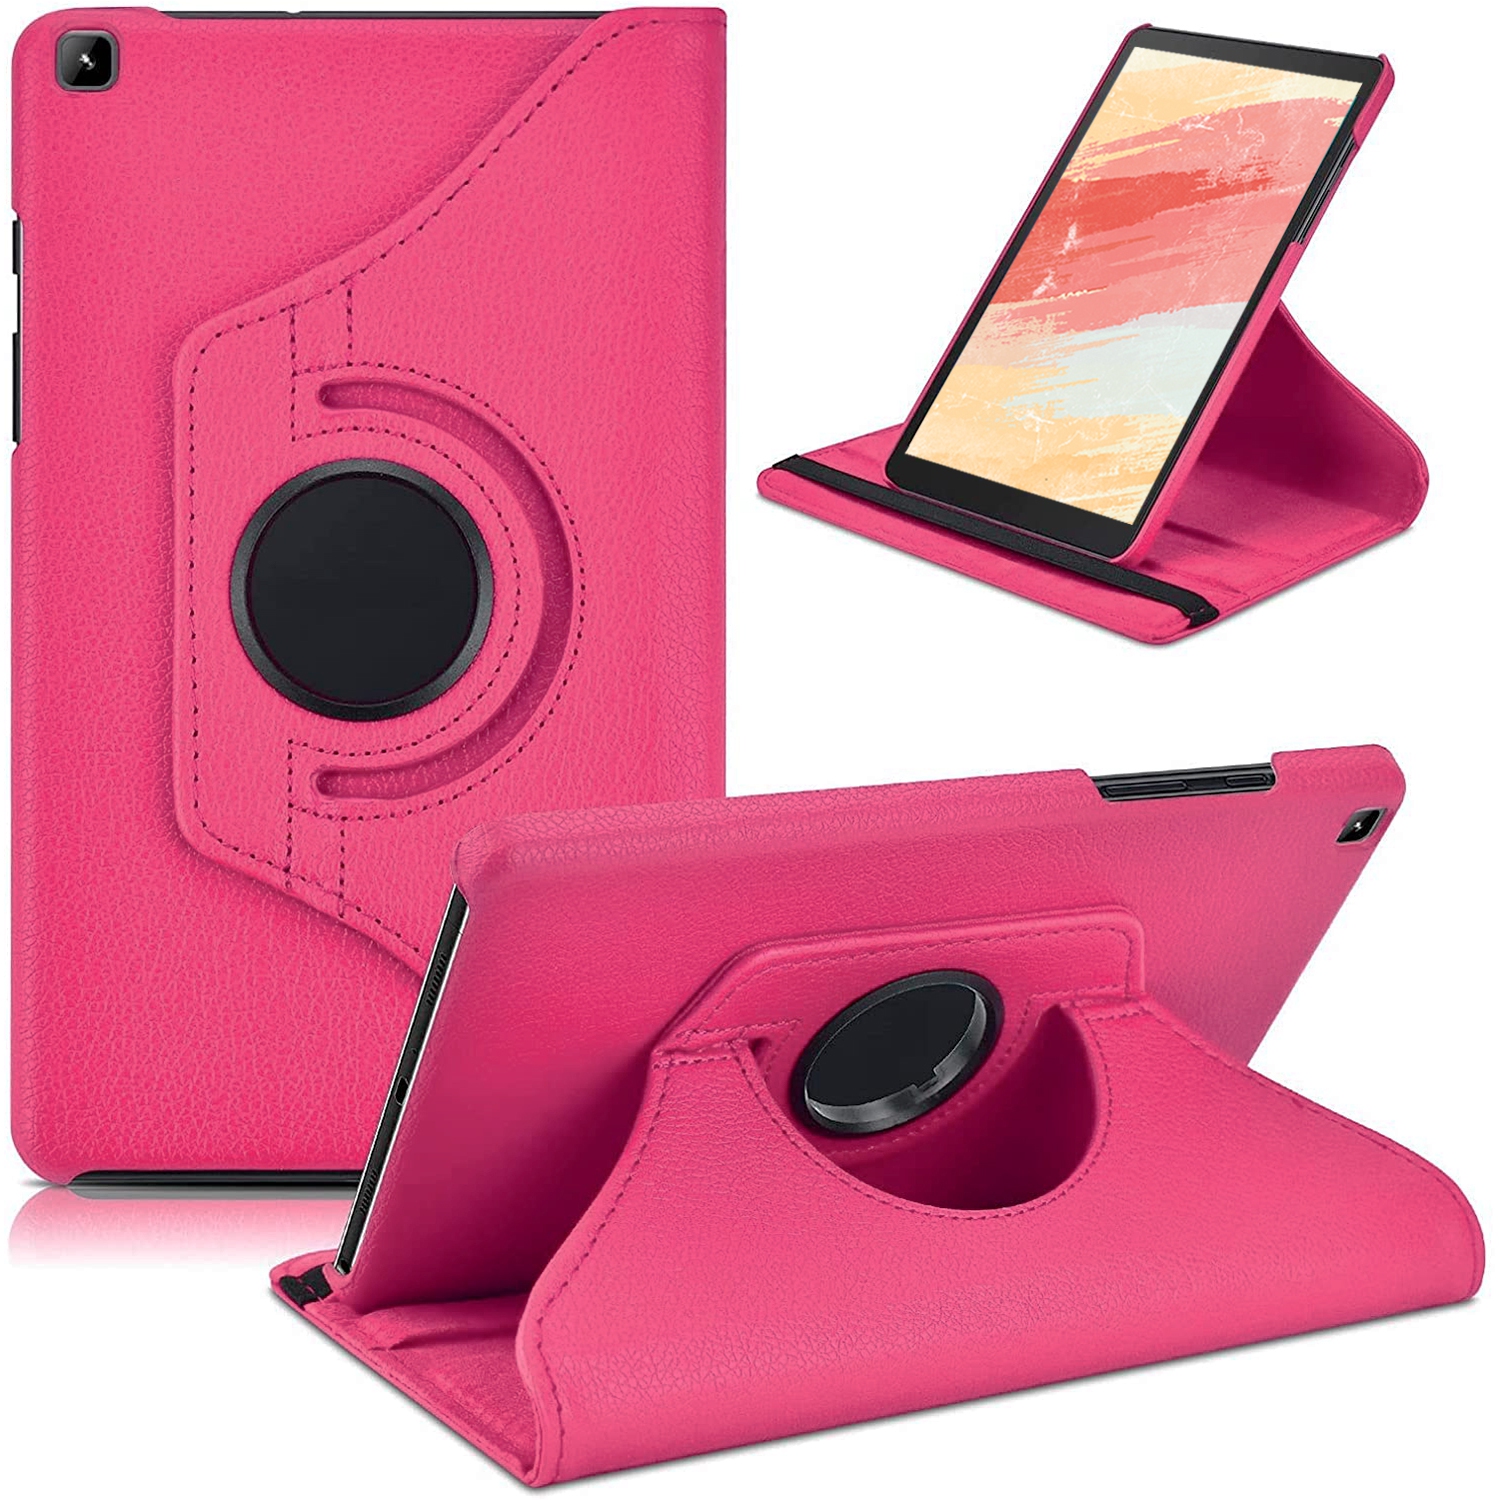 Samsung Galaxy Tab A7 10.4 inches 2020 360° Swivel Rotating Case, (Model SM-T500/T505/T507), Multi-Angle Viewing Stand, PU Leather Case, Auto Wake Up/Sleep with Protective Elastic Strap, Pink